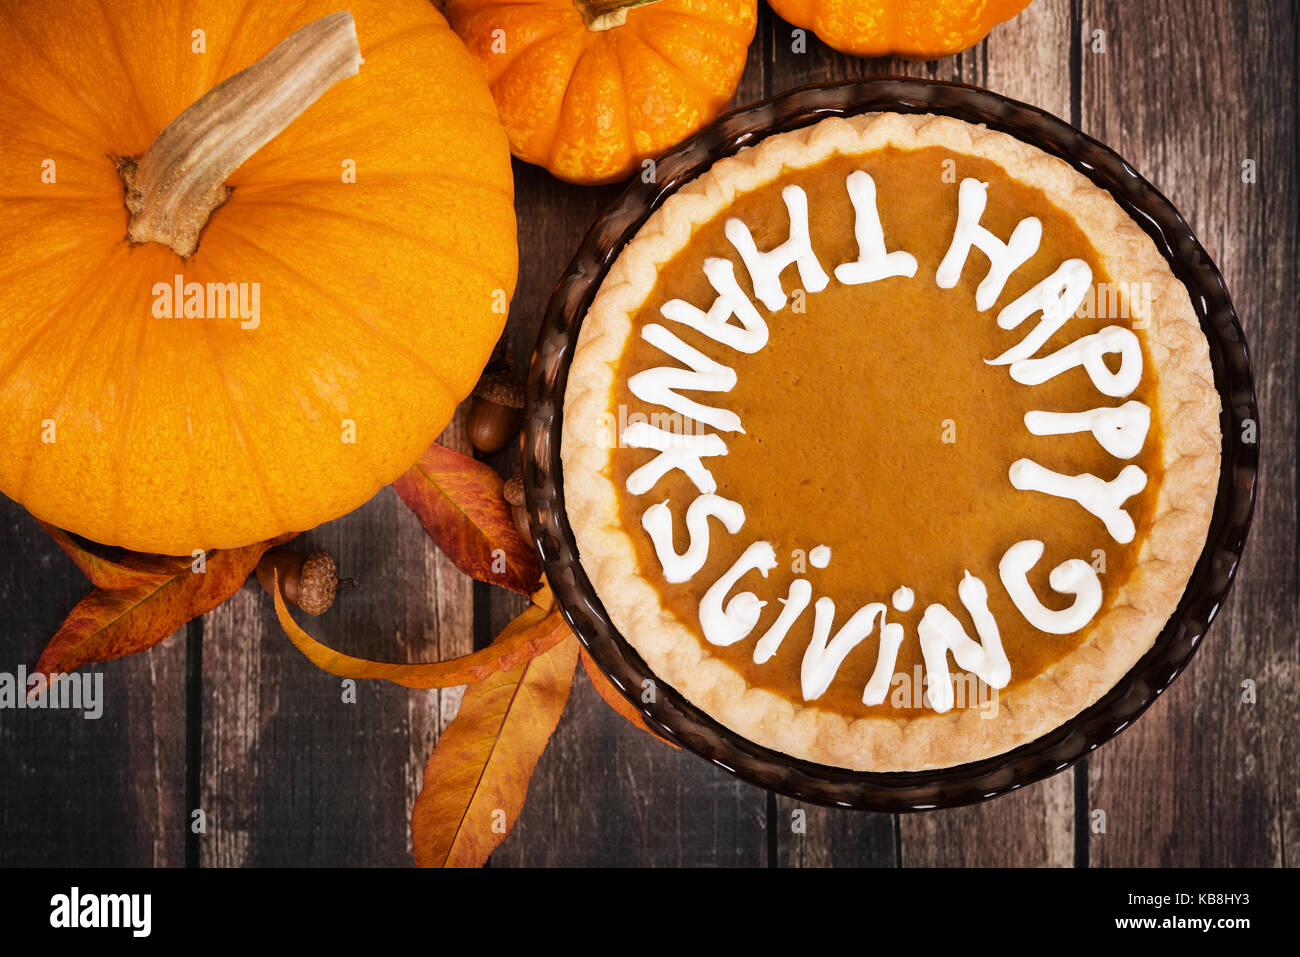 Pumpkin pie with Happy Thanksgiving text. Displayed with pumpkins, golden autumn leaves, and acorns on vintage, wooden table. Top view. Stock Photo